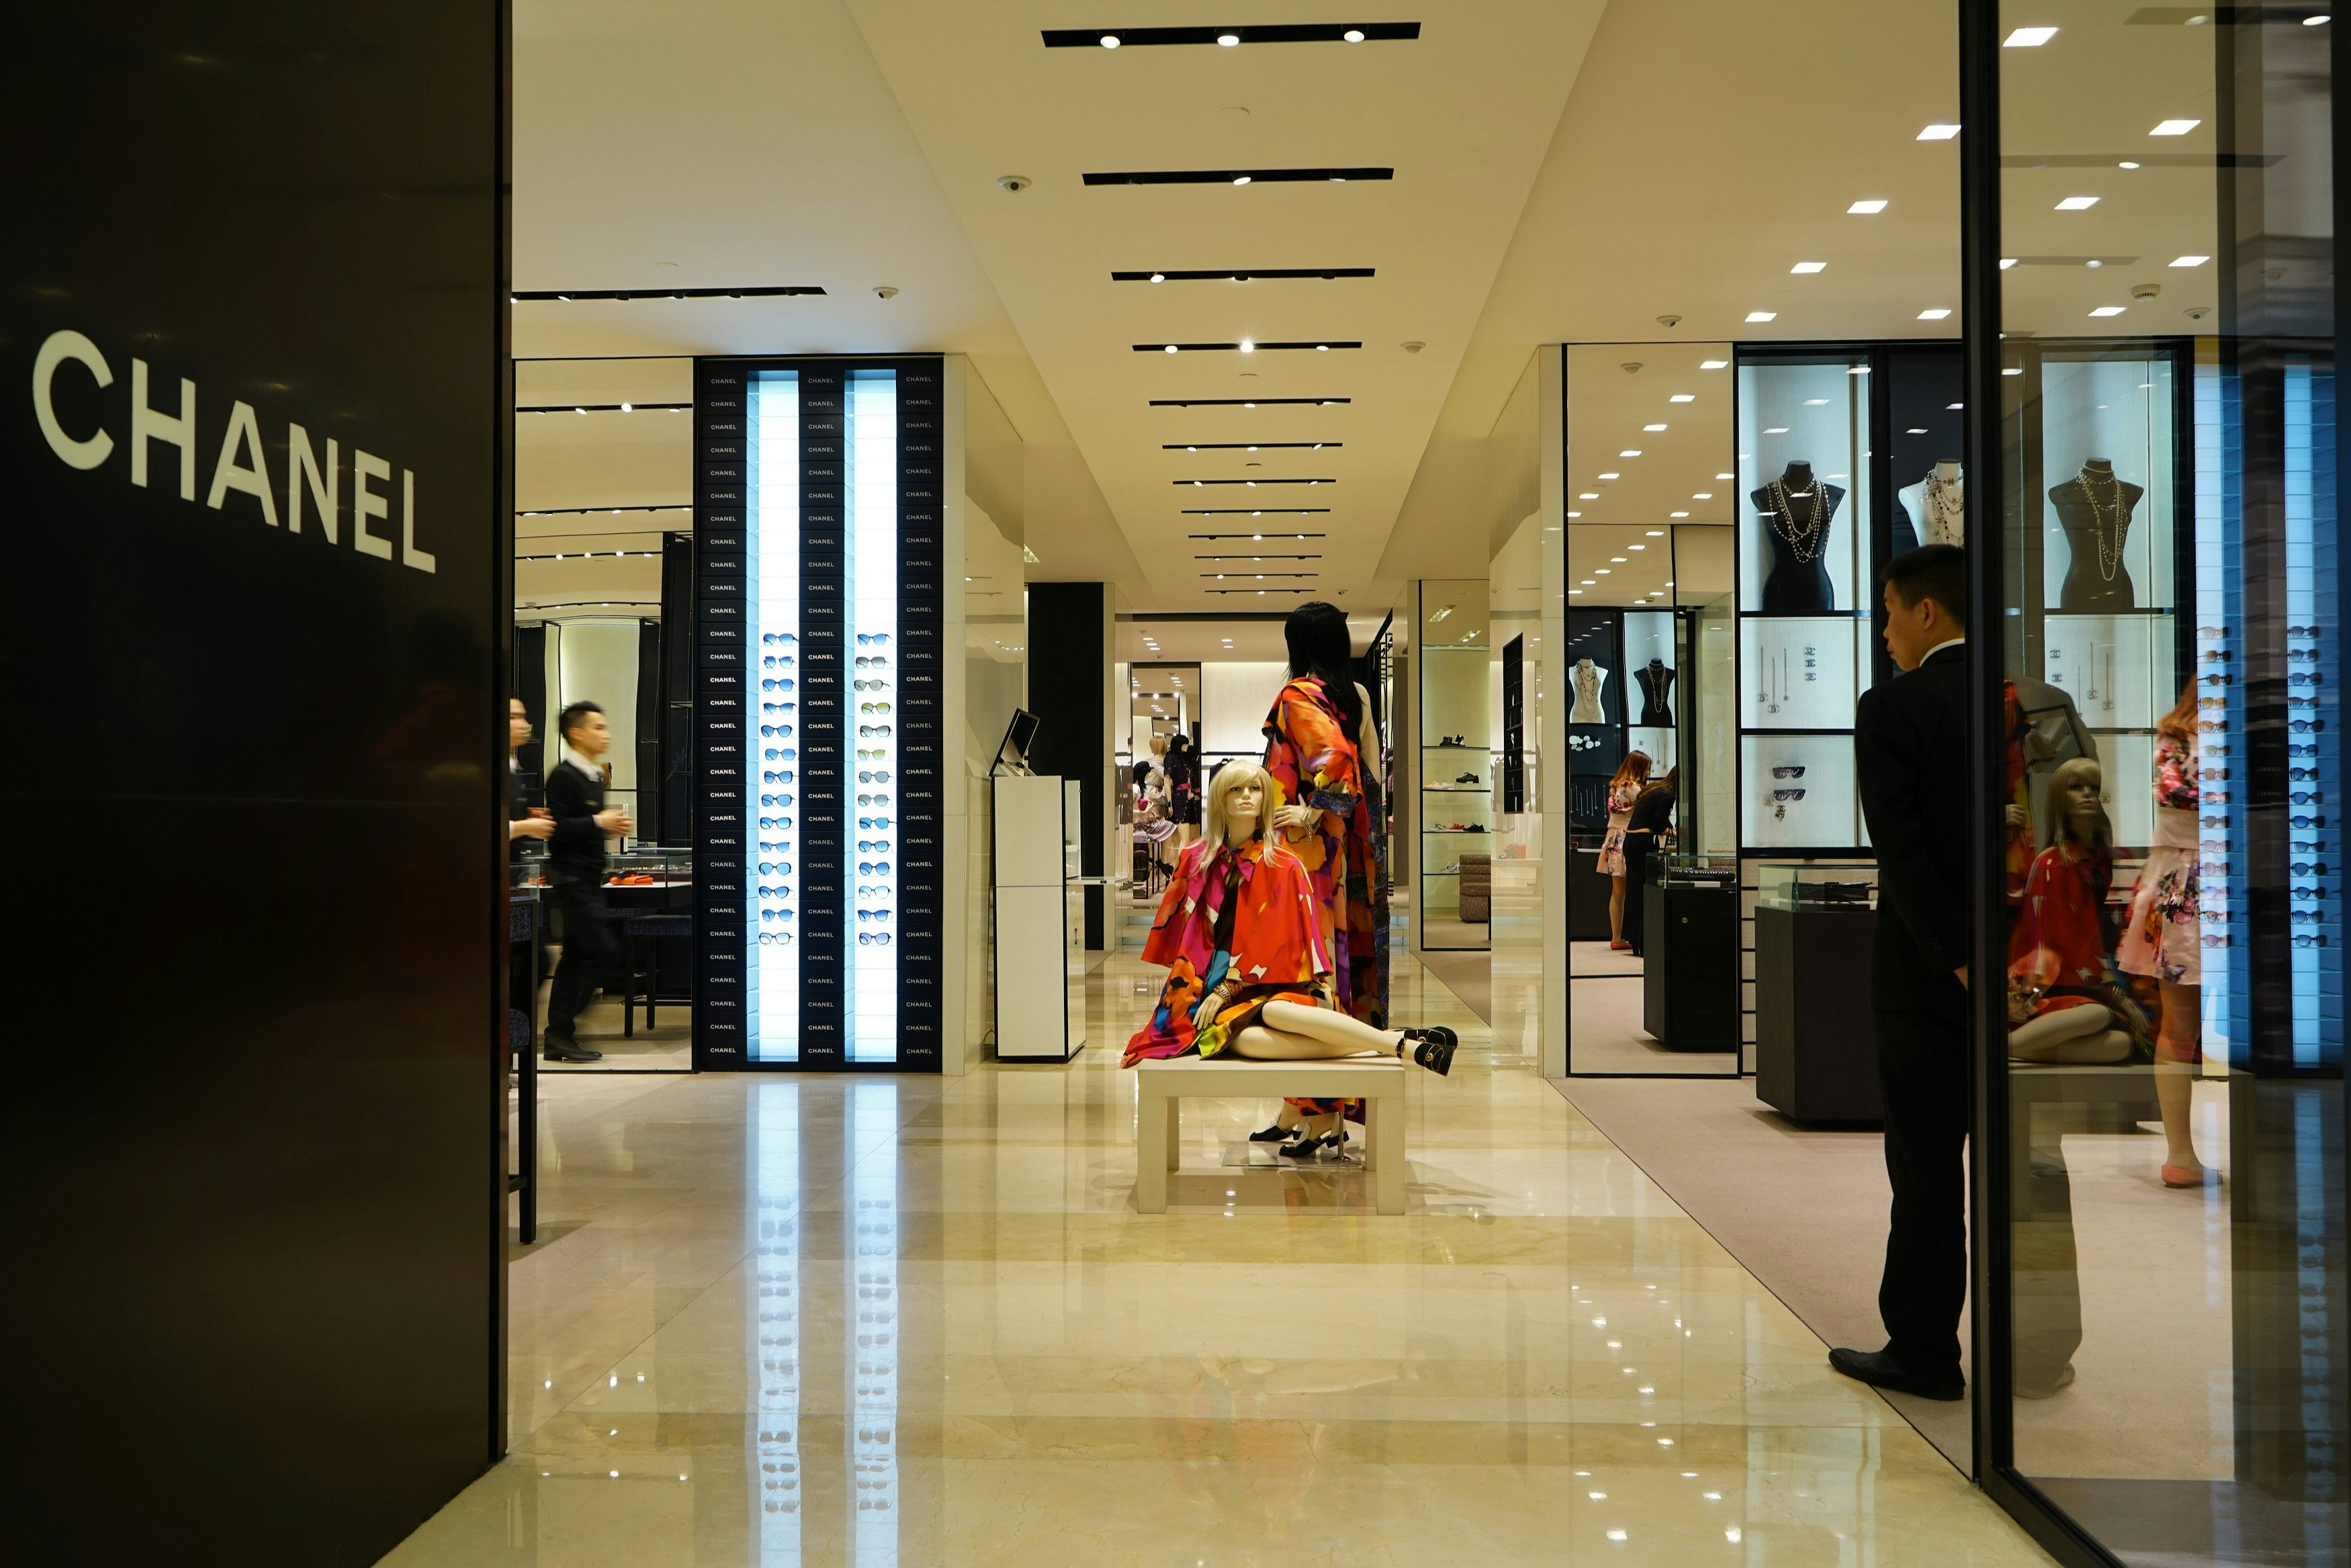 A Chanel boutique in the interior of the IFC Shopping Mall at Lujiazui in Shanghai. (Shutterstock/August_0802)